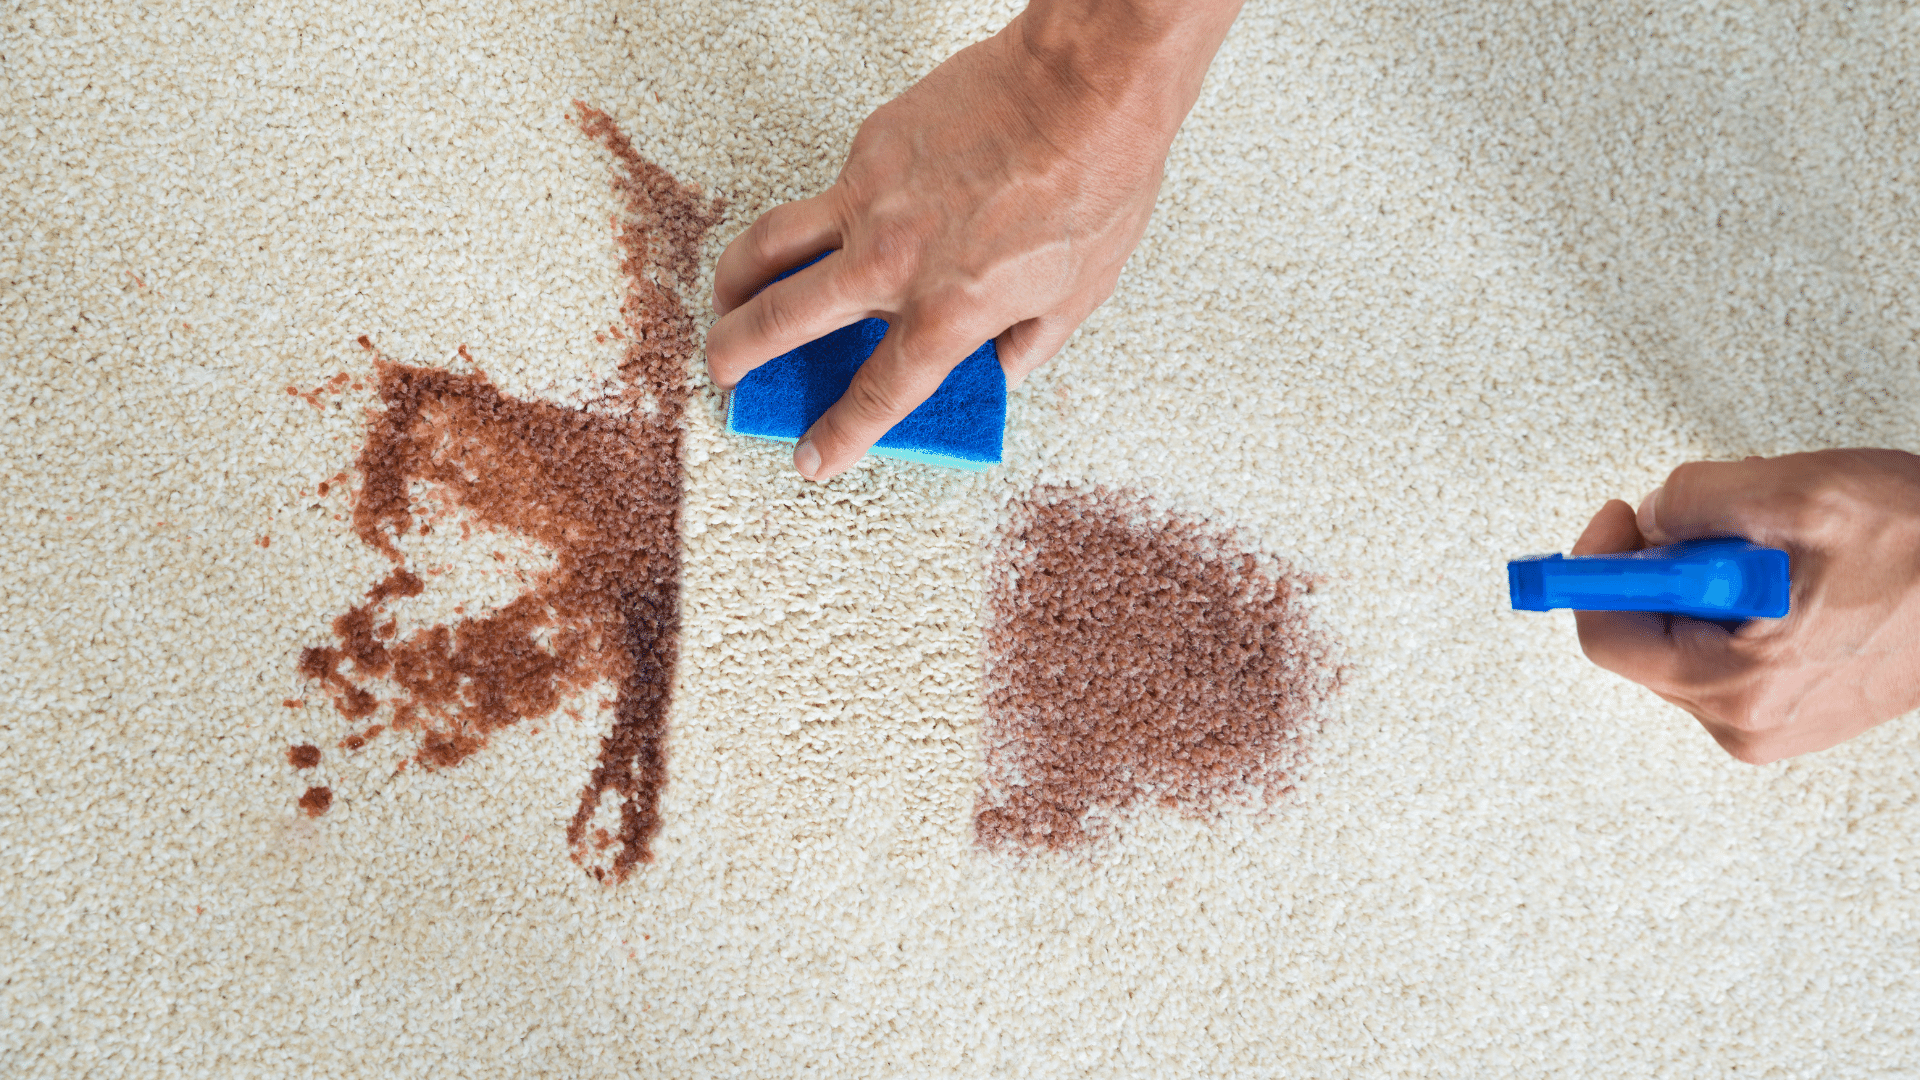 How To Get Hair Dye Out Of Carpet: Tips And Tricks